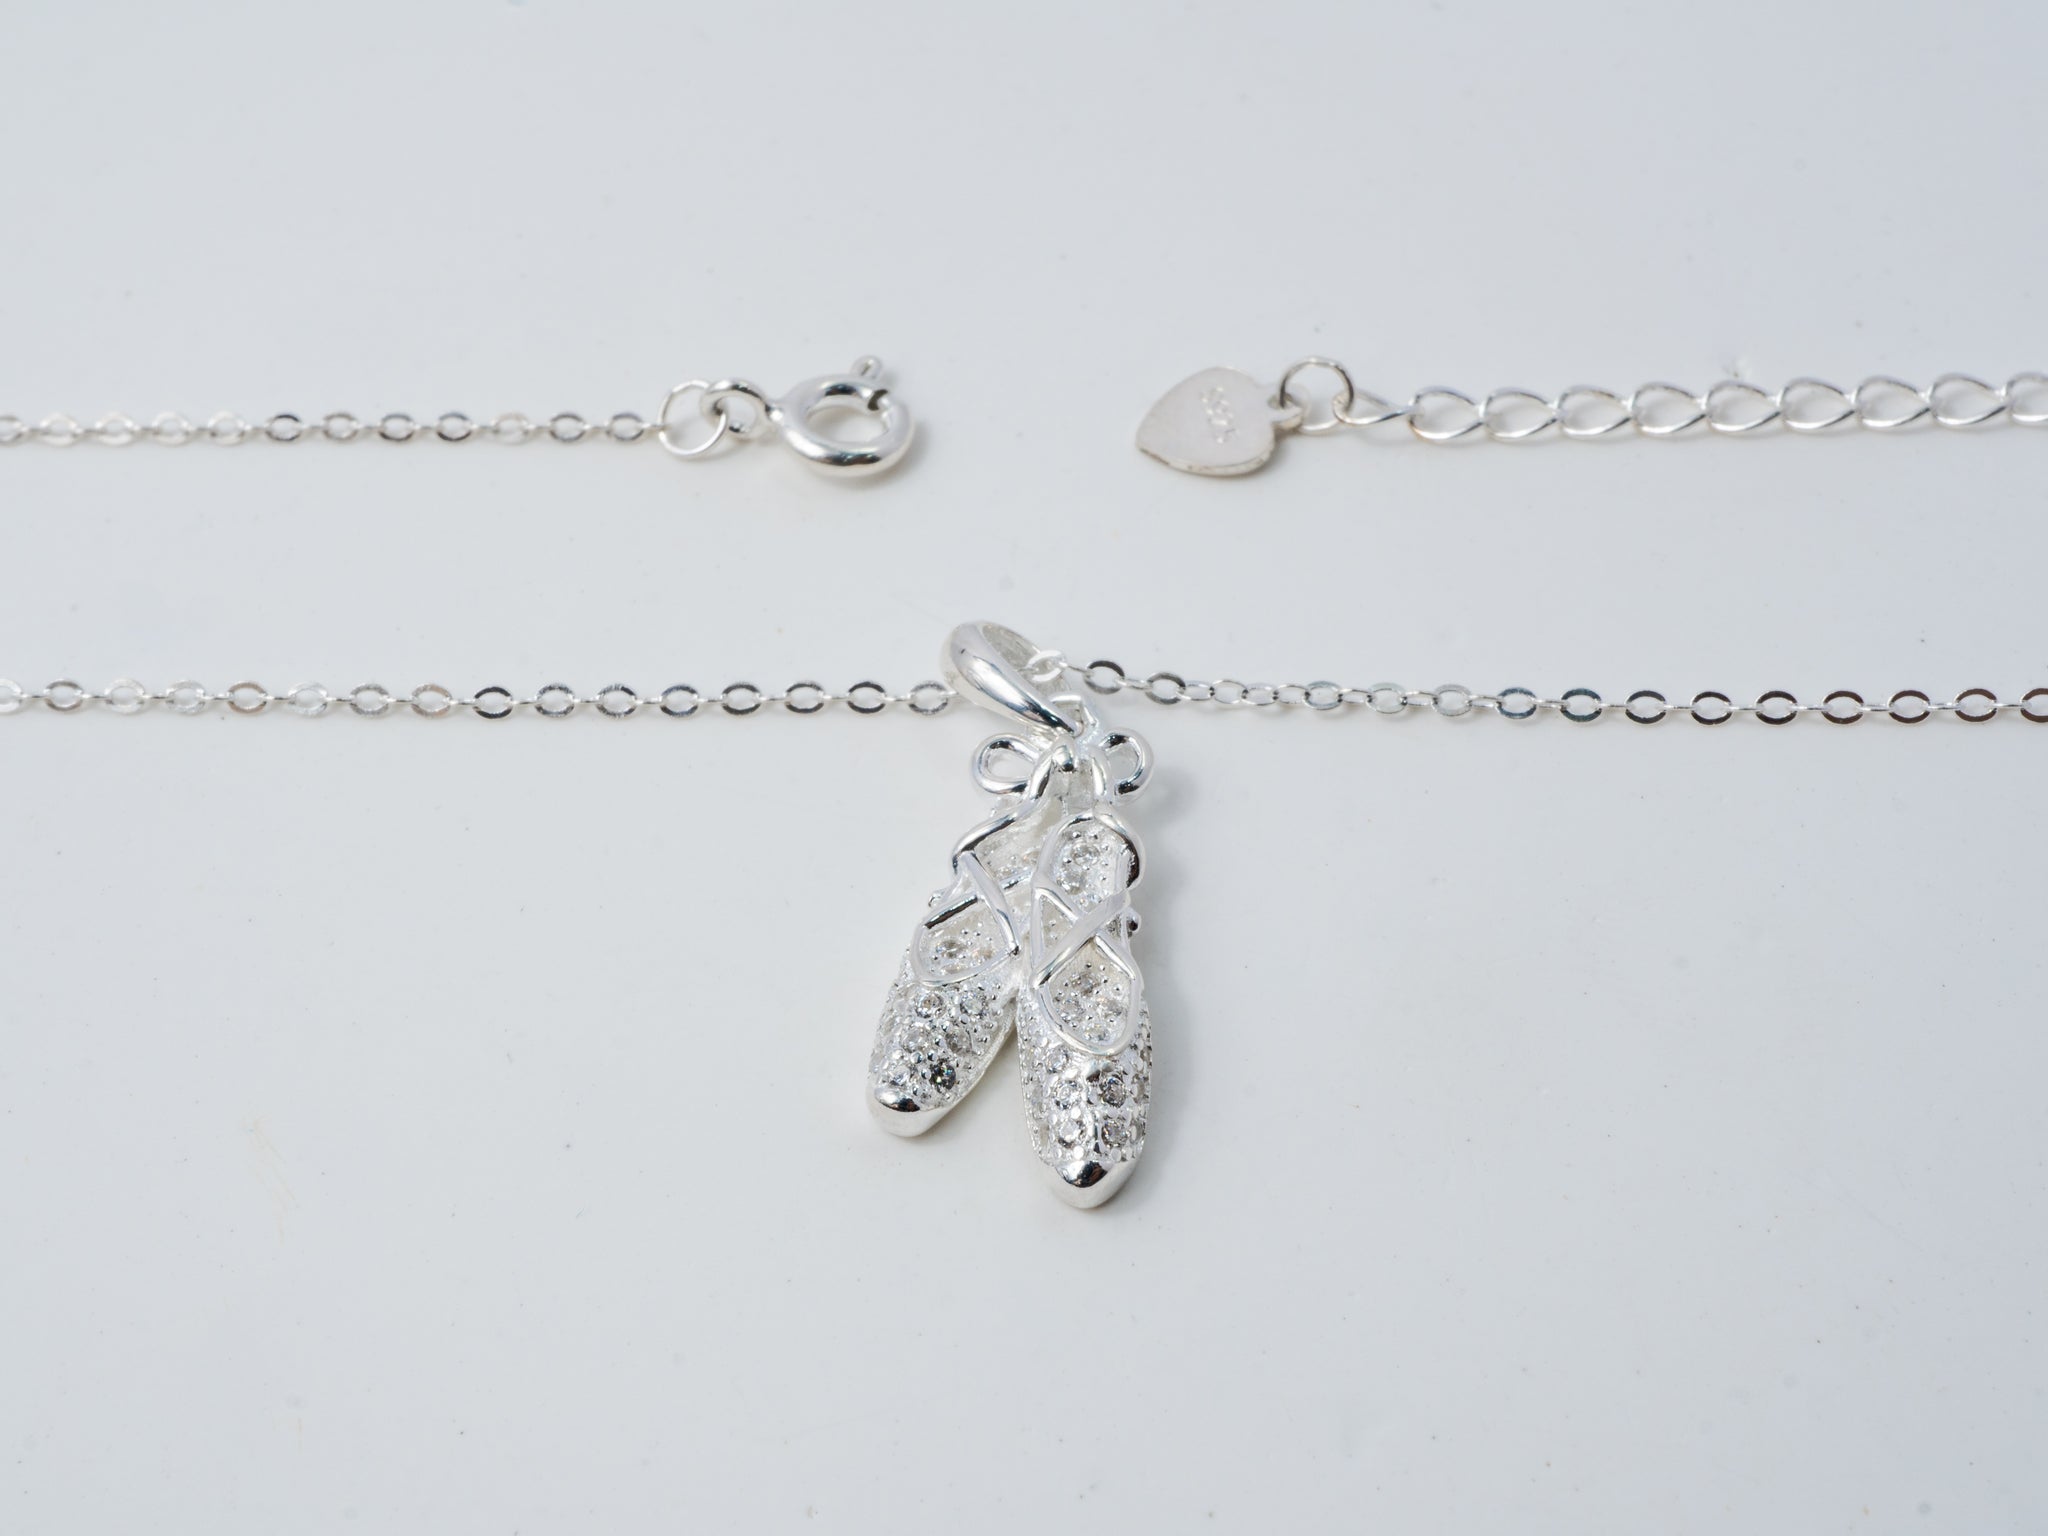 Dây chuyền bạc nữ CDE Ballet Shoes Necklace Crystal CDE6127SV 